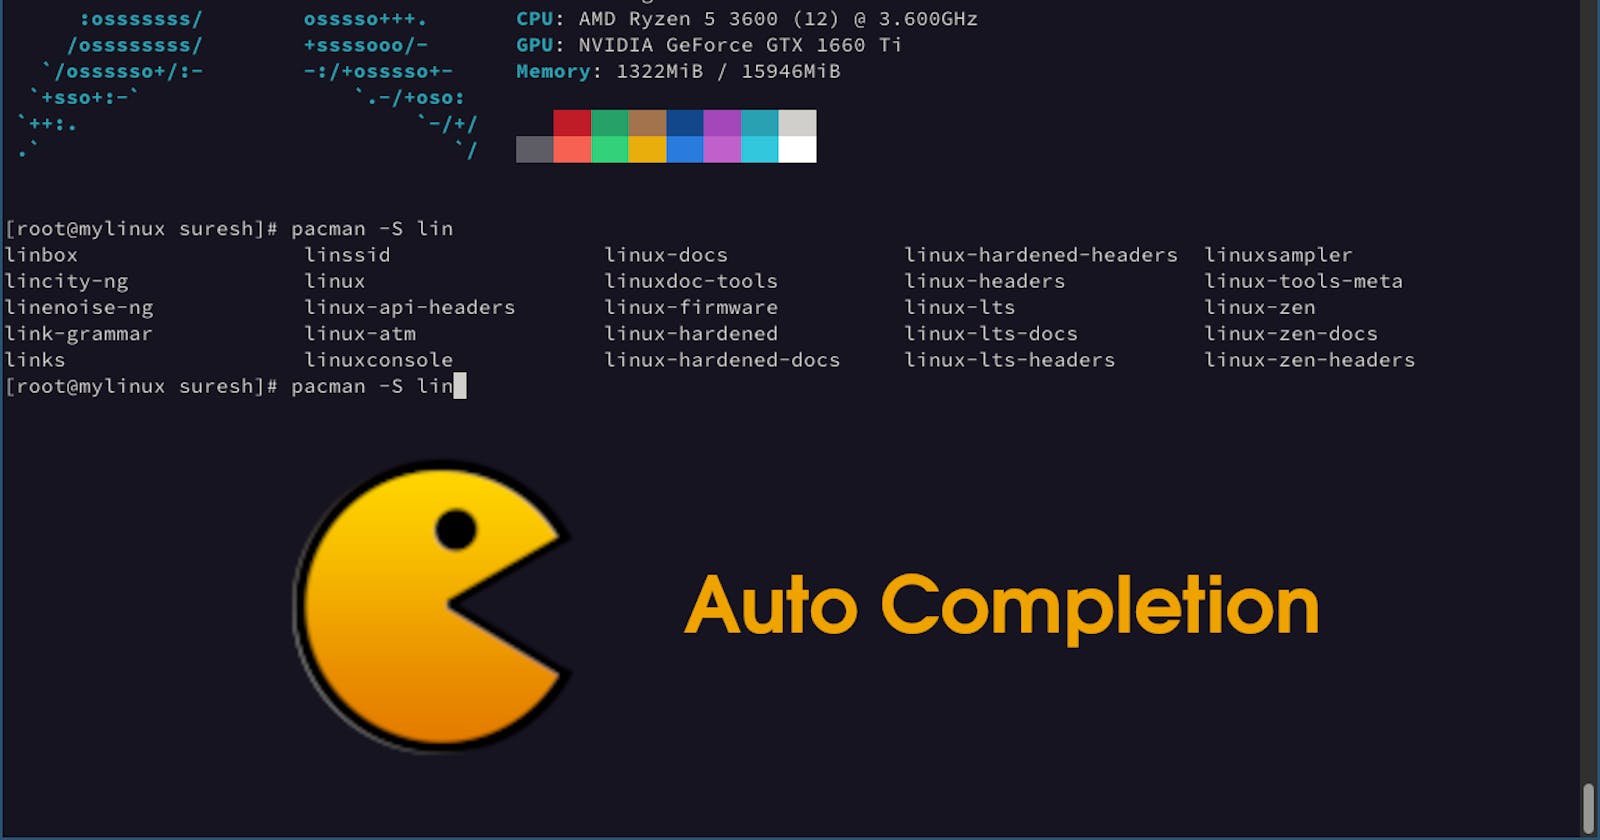 How does autocomplete works with pacman in Arch Linux